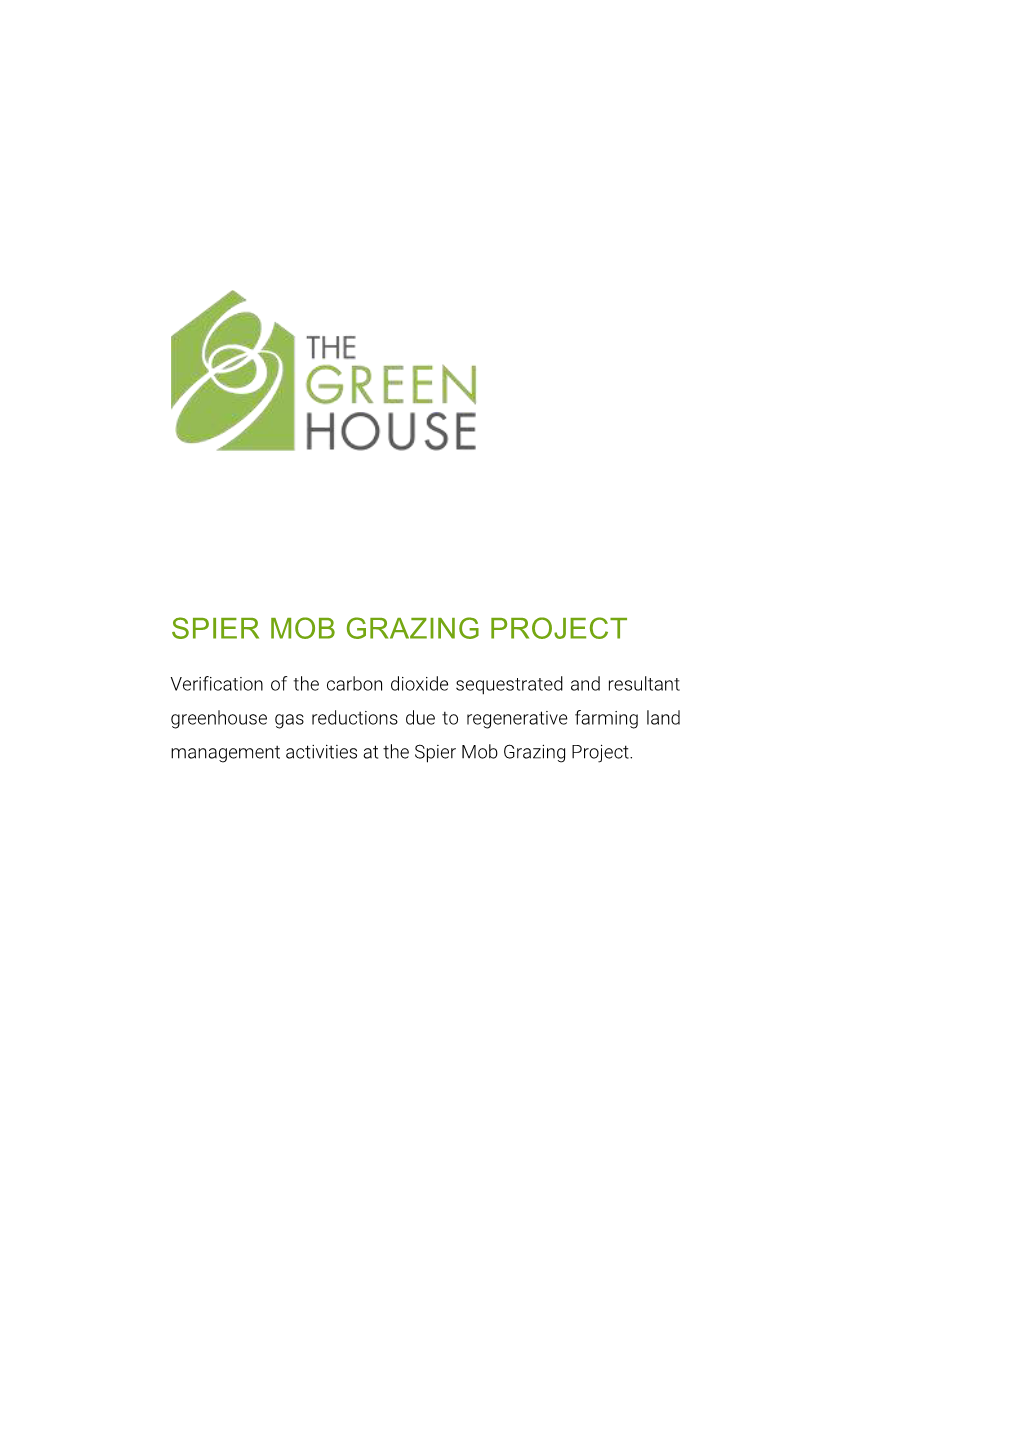 Spier Mob Grazing Project